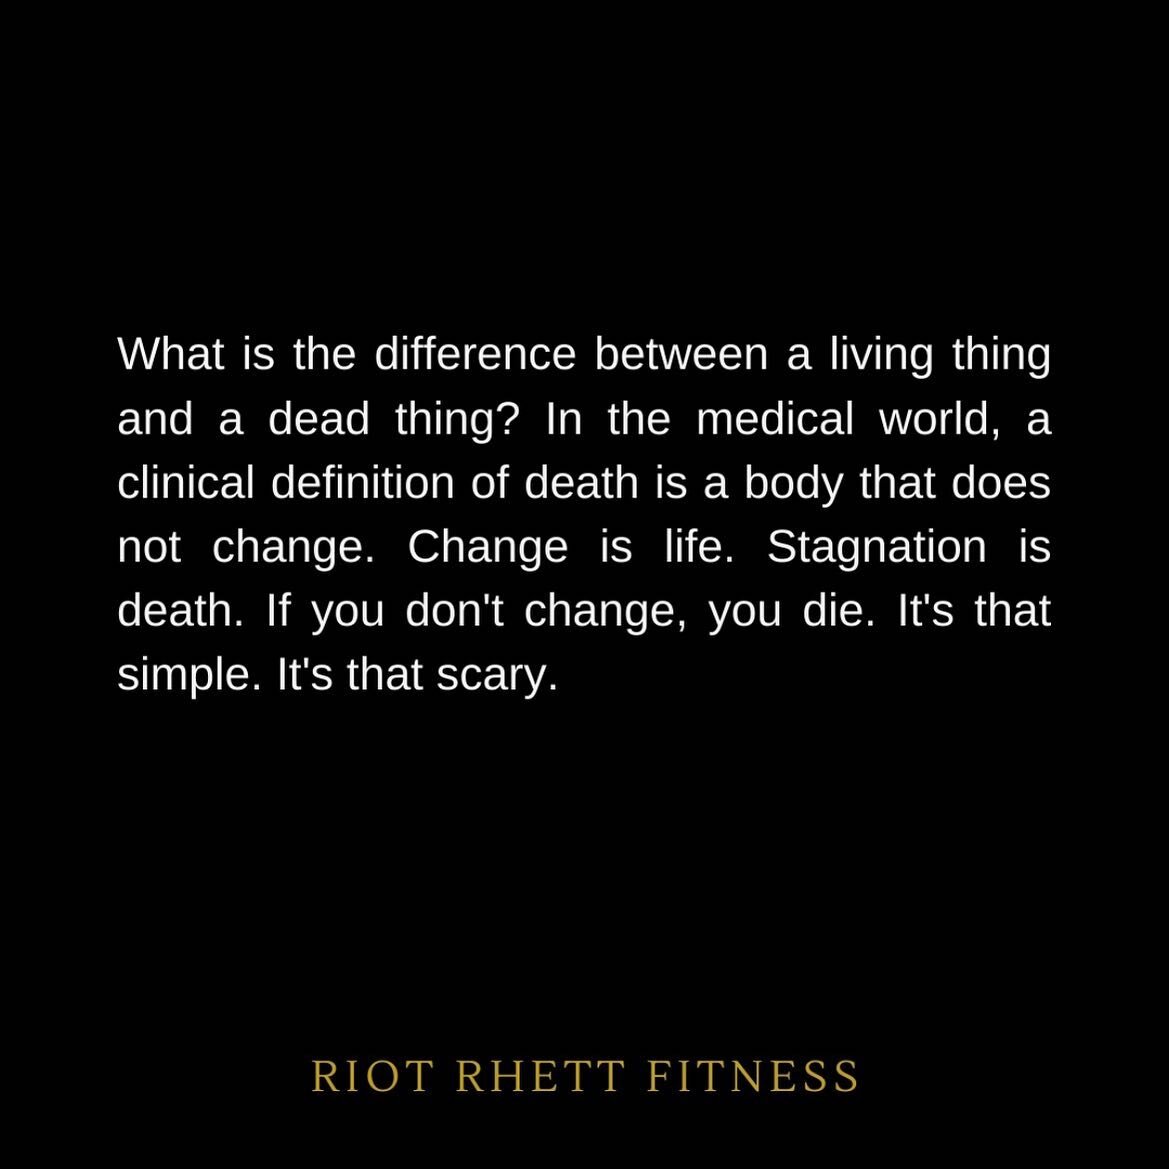 What is the difference between a living thing and a dead thing? In the medical world, a clinical definition of death is a body that does not change. Change is life. Stagnation is death. If you don't change, you die. It's that simple. It's that scary.